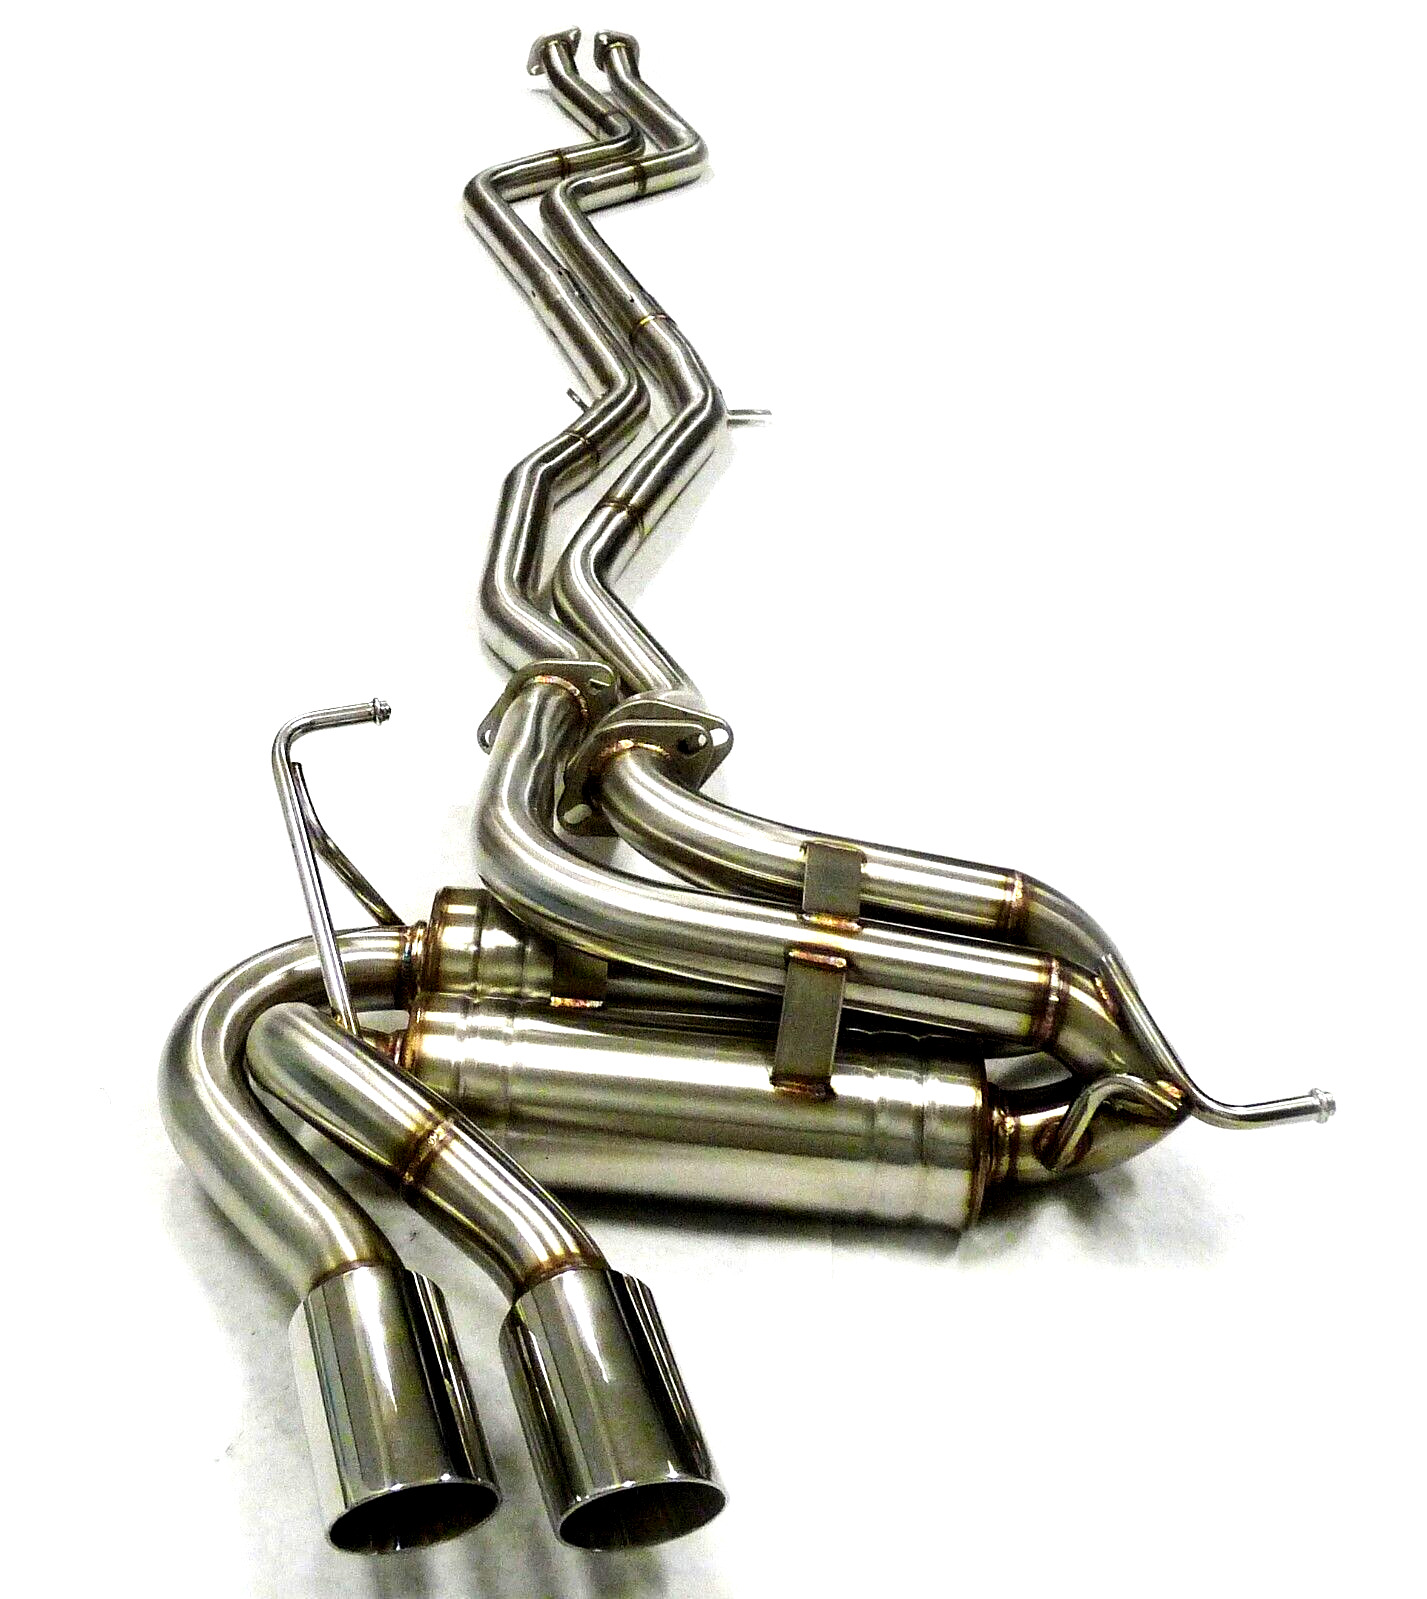 Catback Exhaust Fitment For 06-08 Z4 E85/86 3.0L (Flanges Inward) By Becker-P